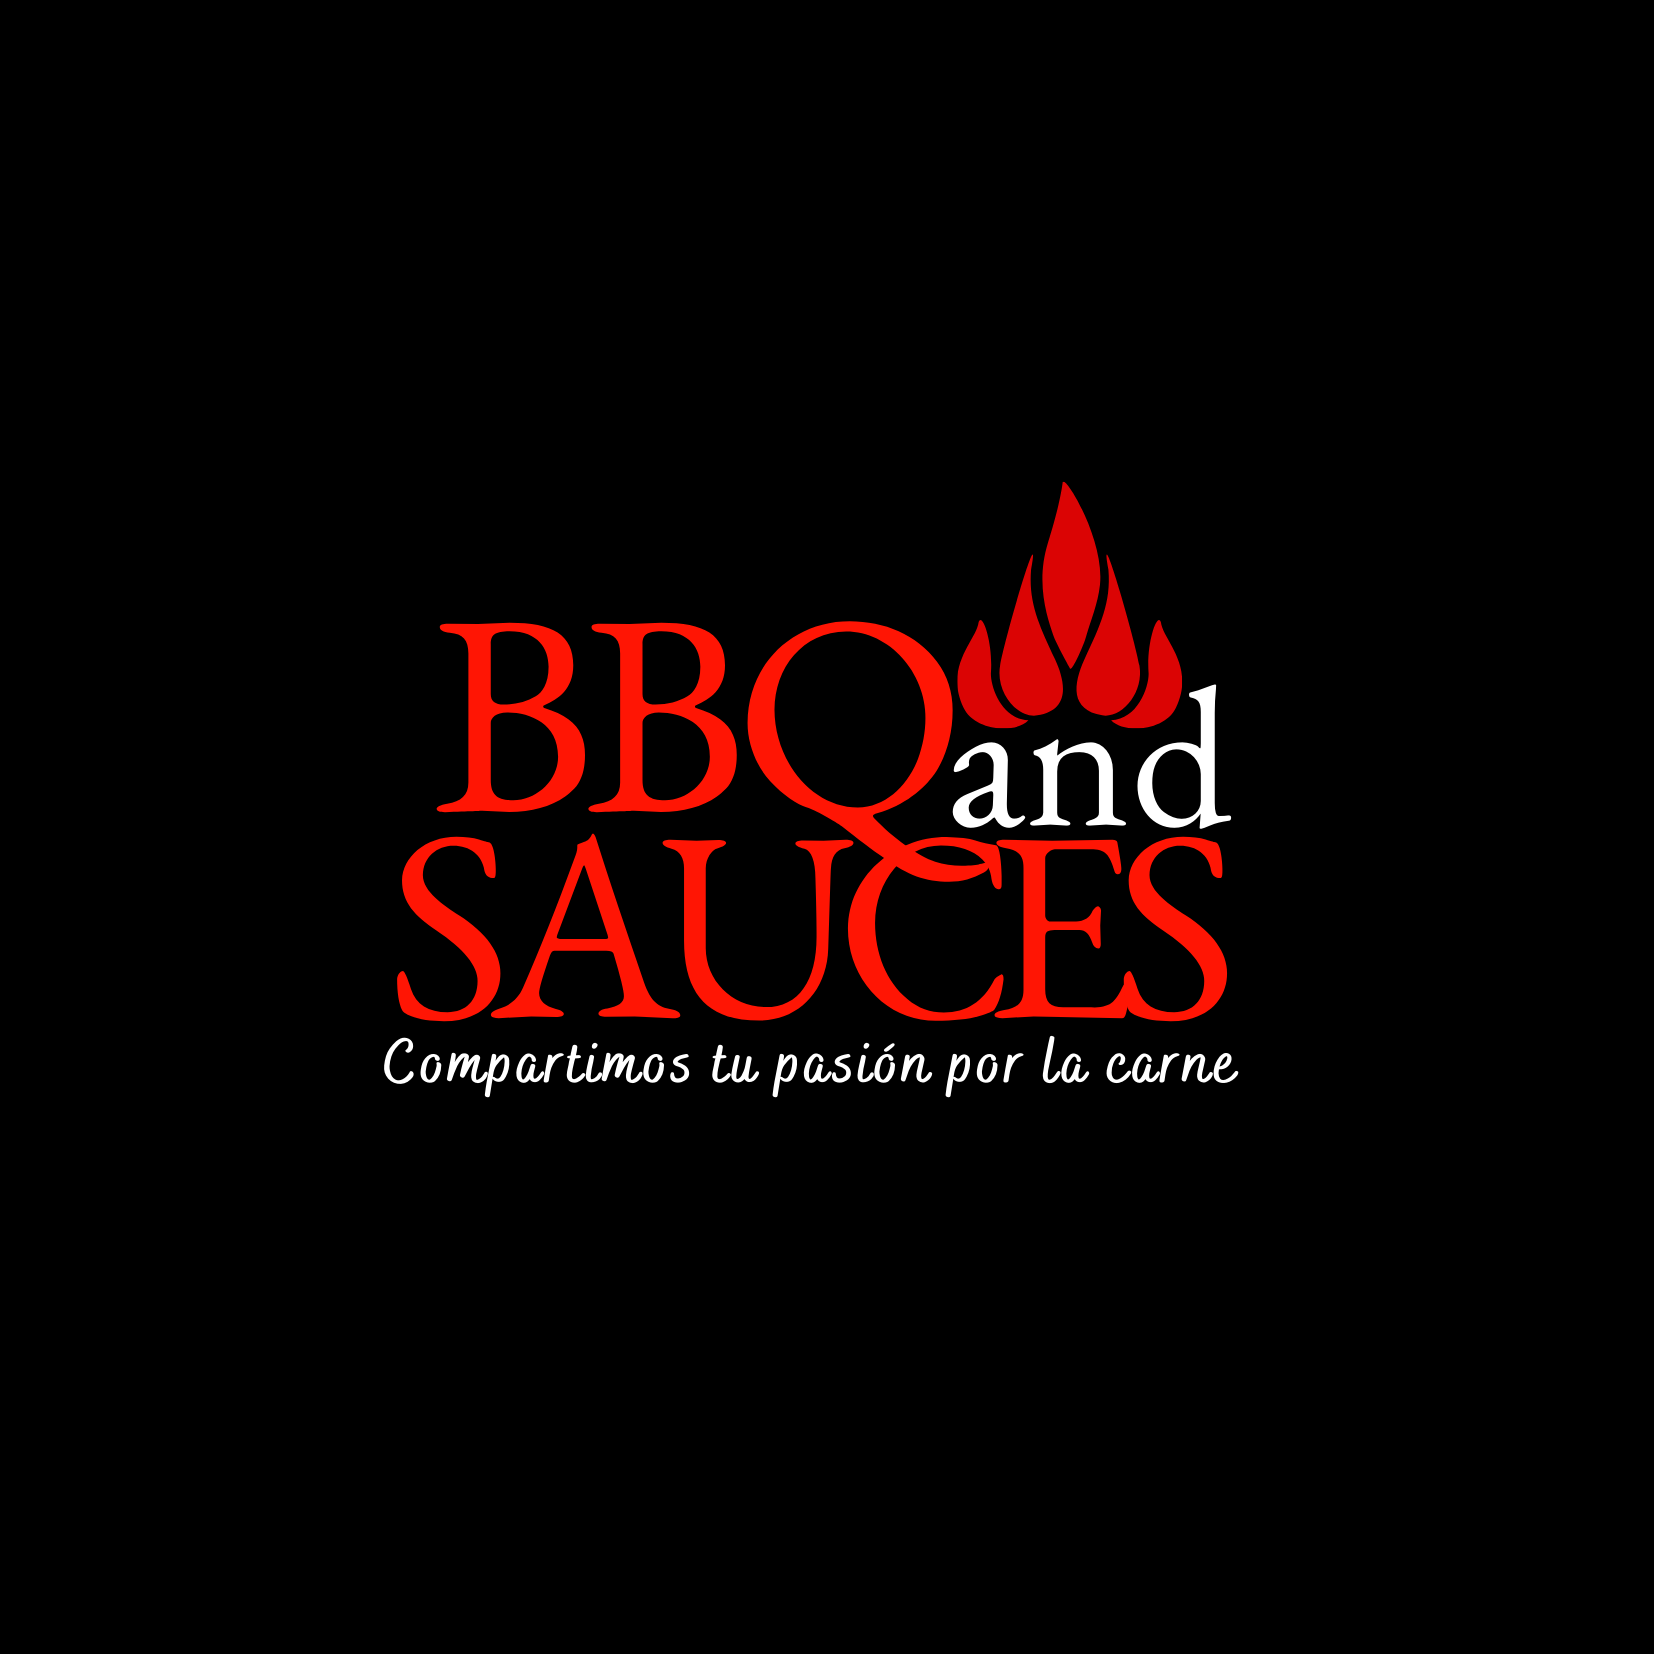 BBQ and Sauces